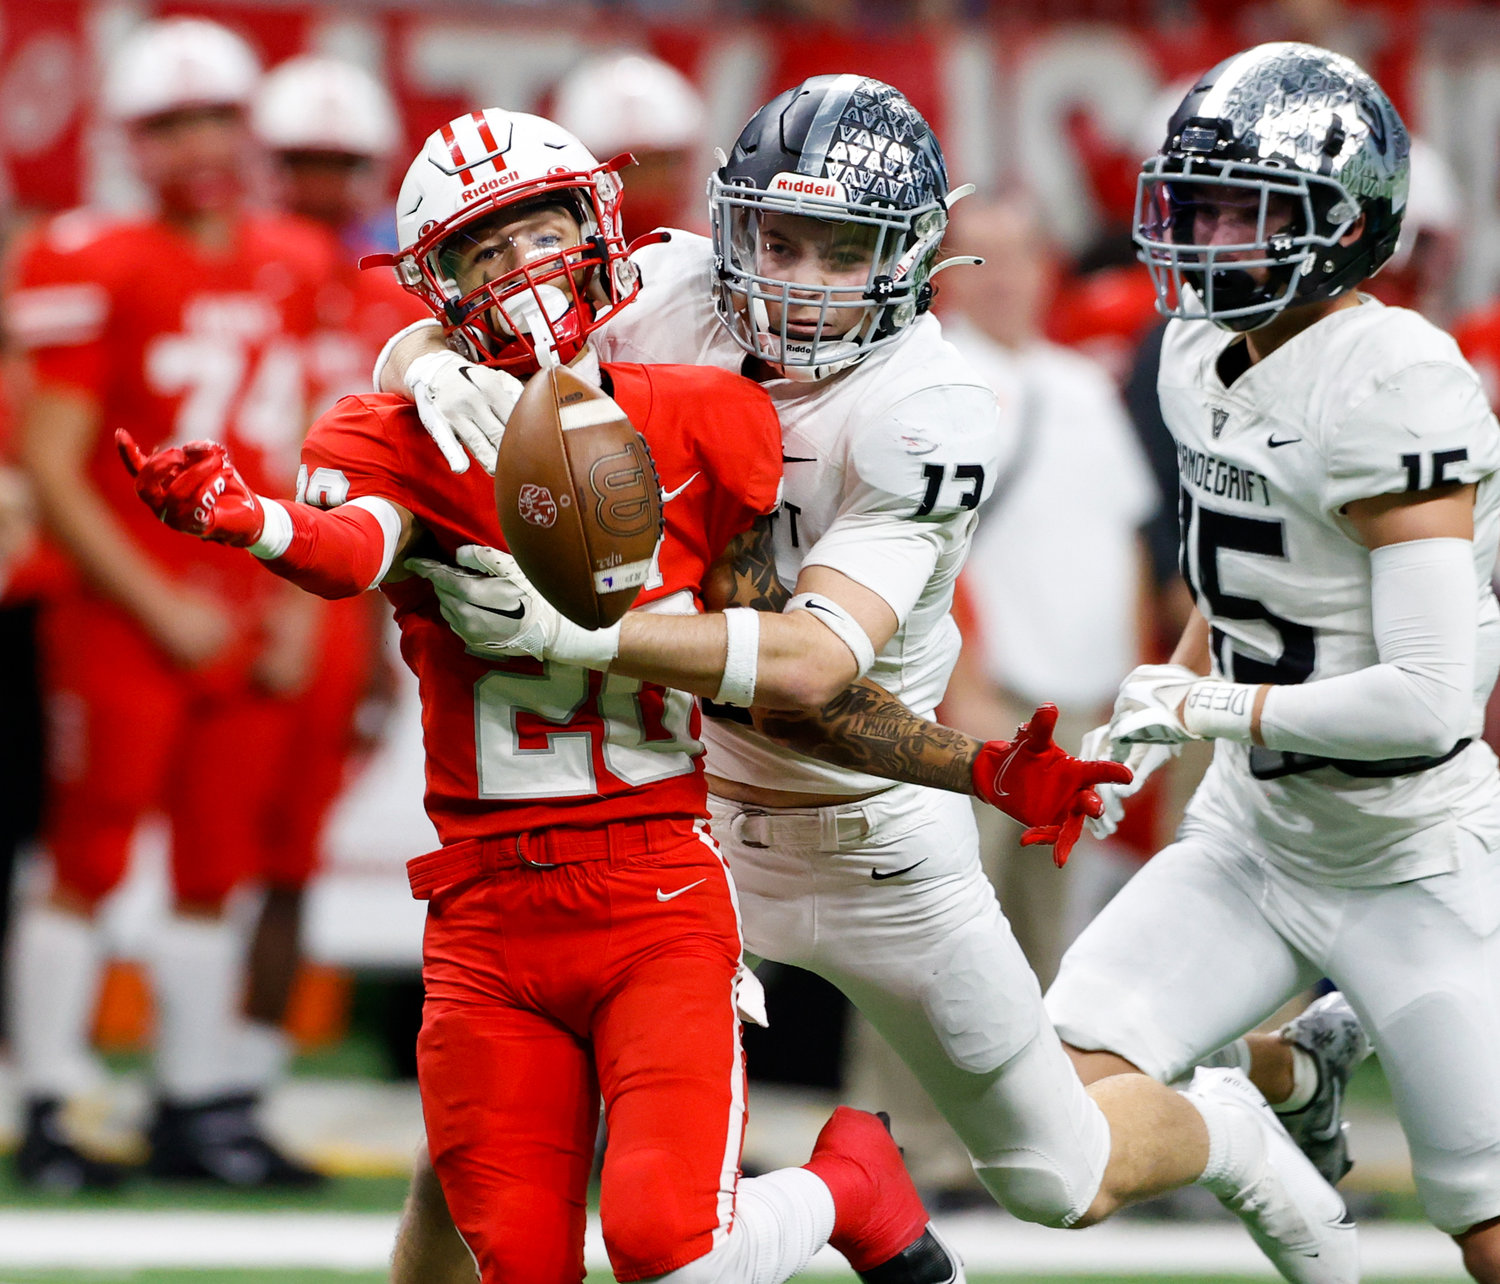 Vandegrift Vipers senior defensive back Davis Scott (13) defends a pass intended for Katy wide receiver Micah Koenig (20) during the Class 6A-DII state semifinal football game between Katy and Vandegrift on Dec. 10, 2022 in San Antonio.